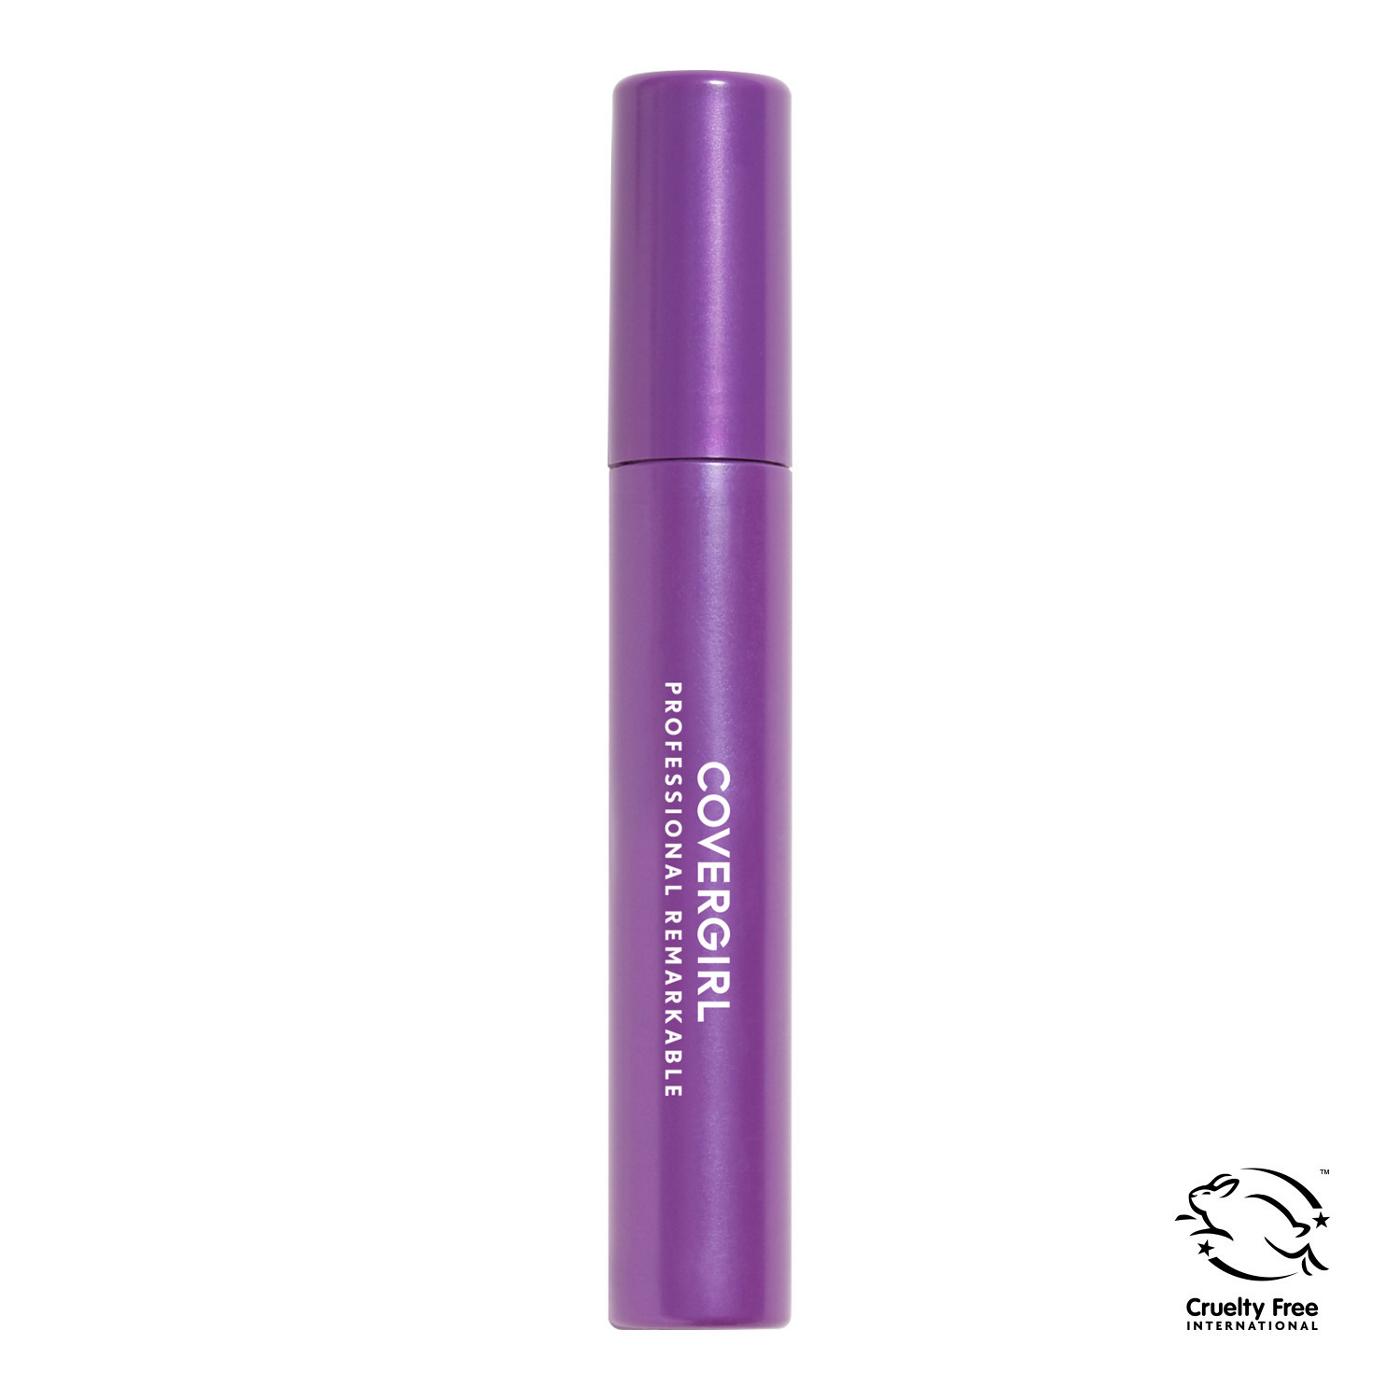 Covergirl Professional Remarkable Mascara 200 Very Black; image 3 of 3